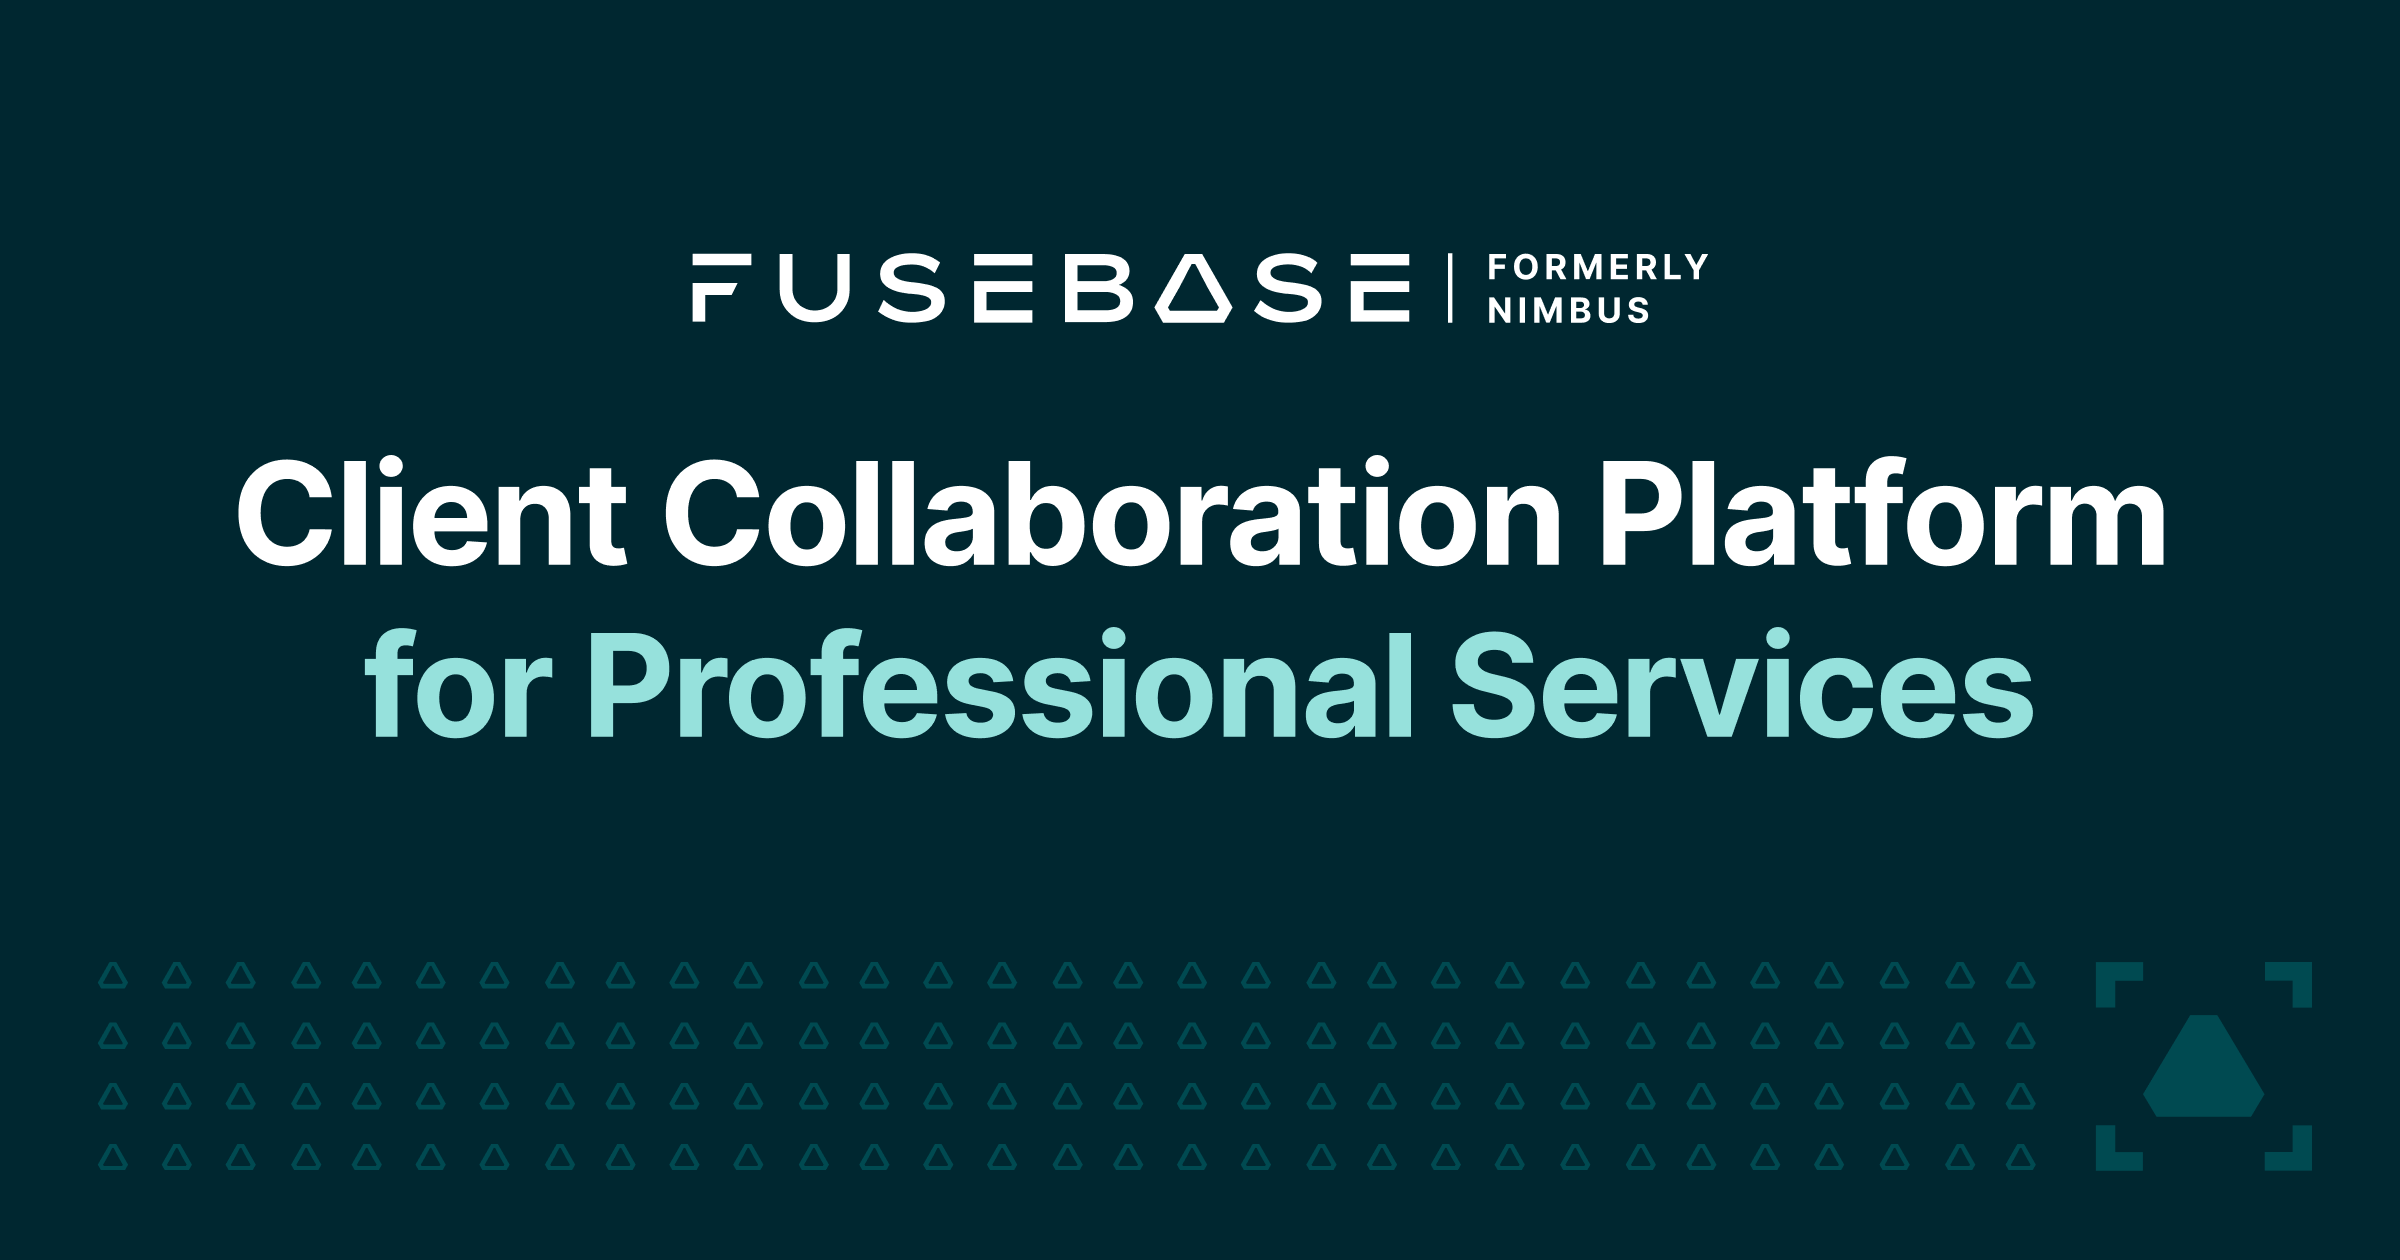 Enhancing Collaboration and Streamlining Workflows with Document Scanning - FuseBase